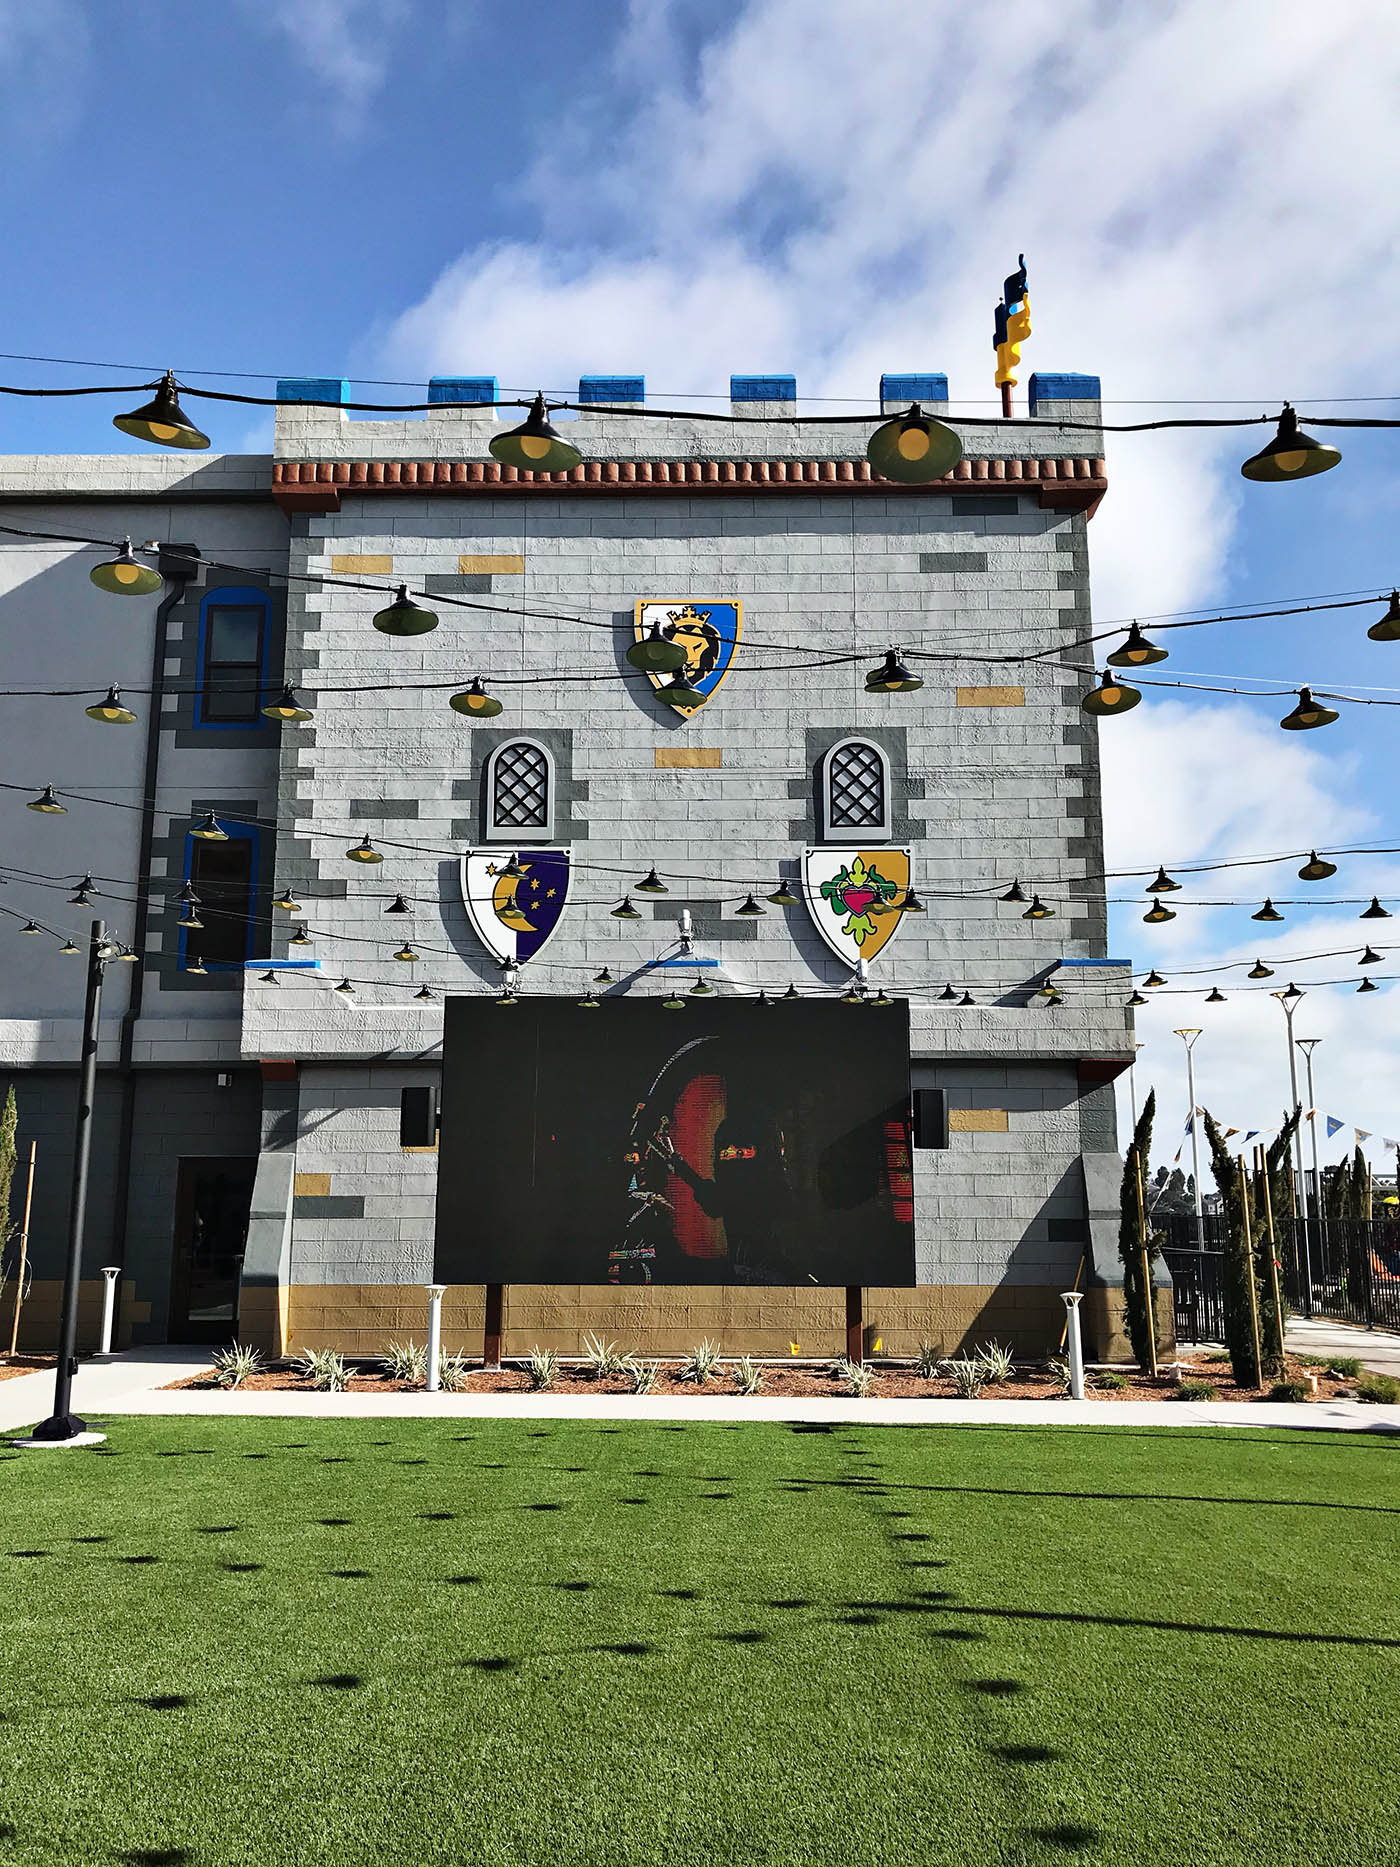 Great reasons to take older kids to the new Legoland Castle Hotel in Carlsbad, CA!